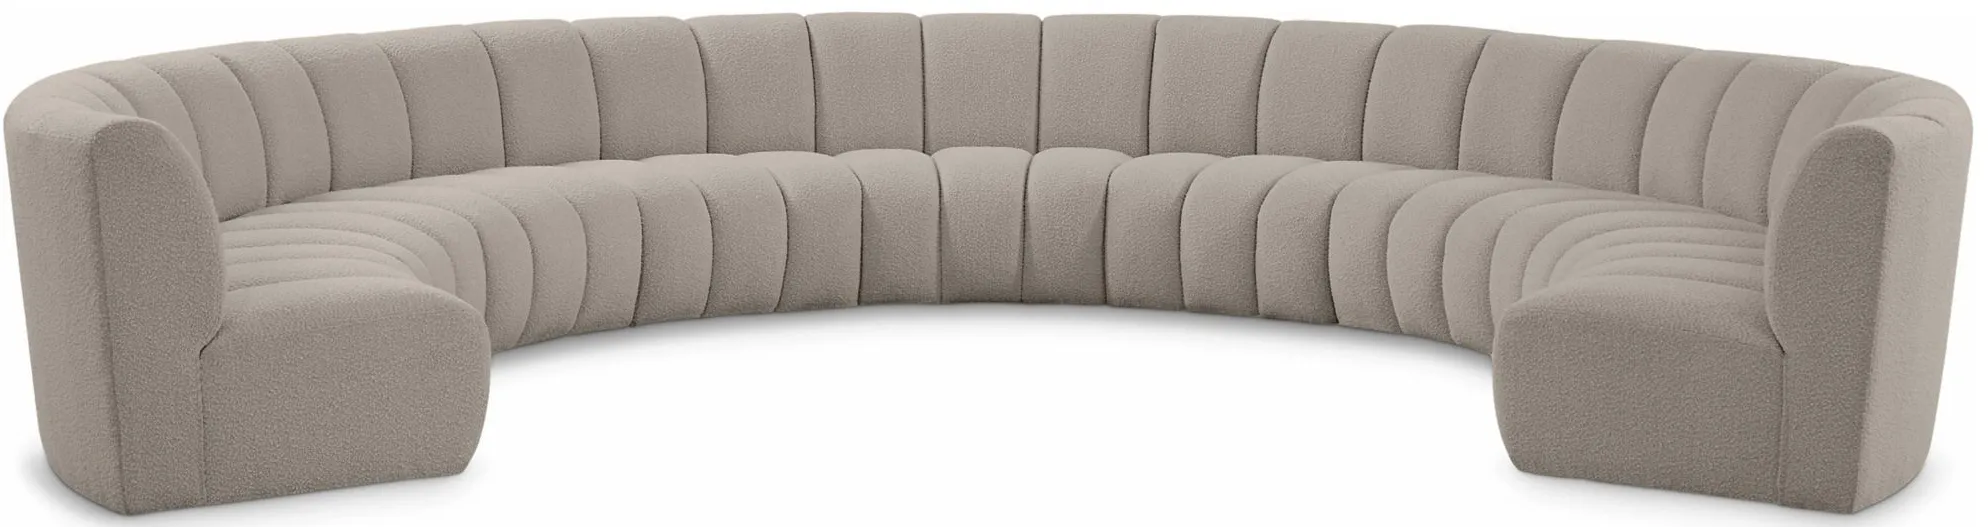 Infinity 9pc. Modular Sectional in Brown by Meridian Furniture